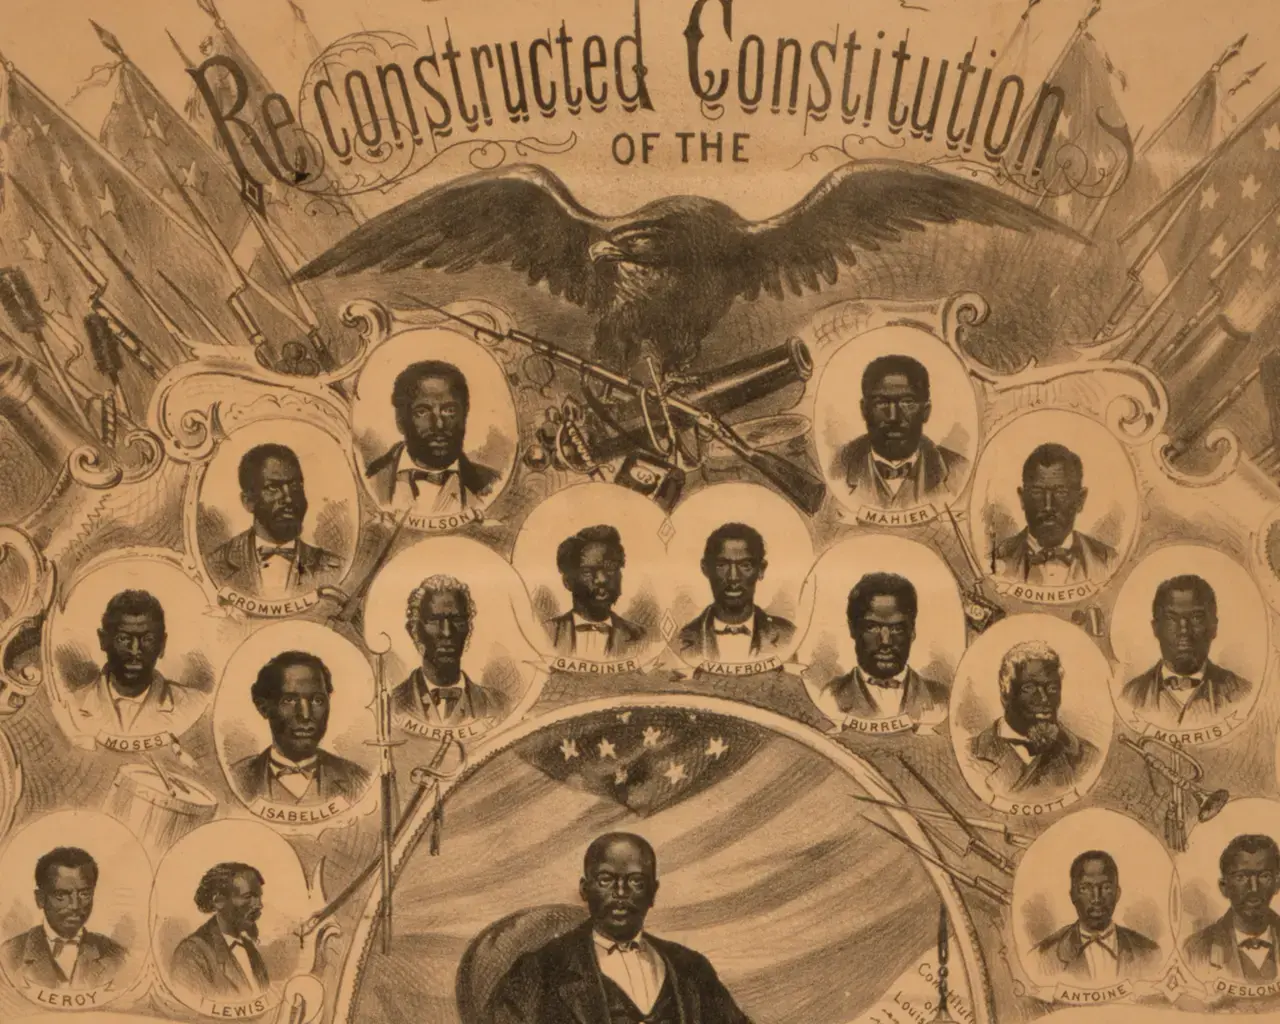 "Reconstruction and the Fourteenth Amendment Project,"&nbsp;extract from the reconstructed Constitution of the state of Louisiana, portraits of the distinguished members of the Convention &amp; Assembly,1868. Photo courtesy of the National Constitution Center.